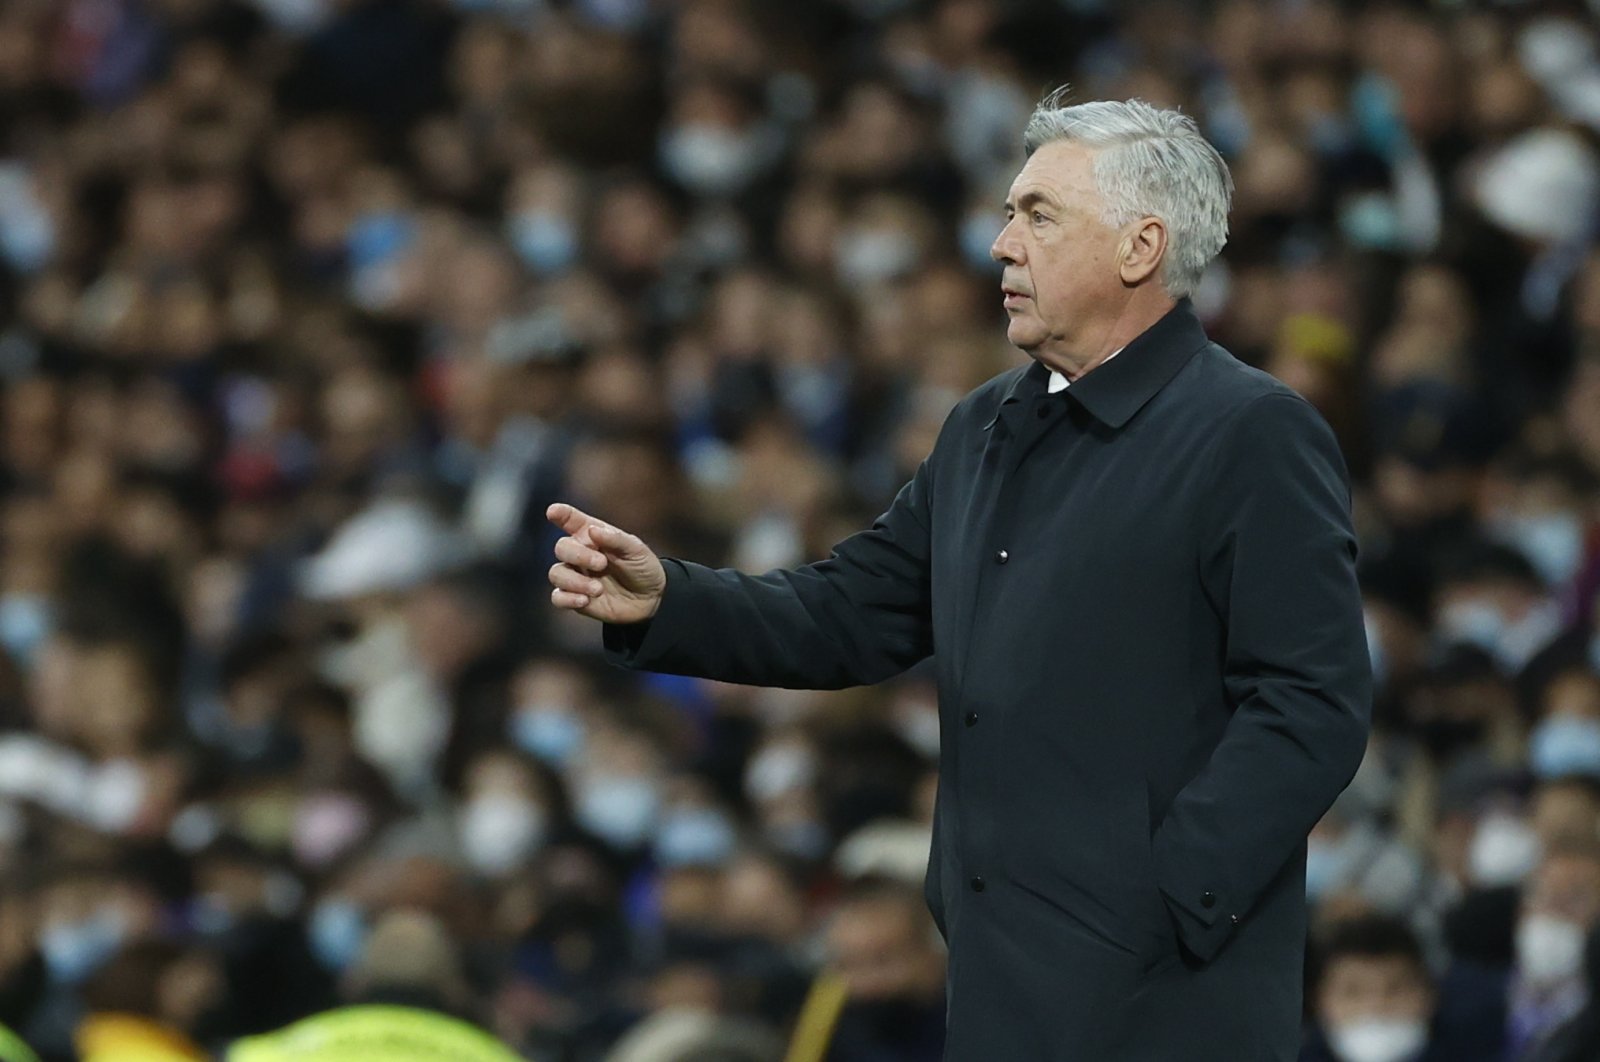 Real Madrid&#039;s head coach Carlo Ancelotti reacts during &quot;El Clasico,&quot; the Spanish La Liga soccer match between Real Madrid and FC Barcelona in Madrid, Spain, March 20, 2022. (EPA Photo)